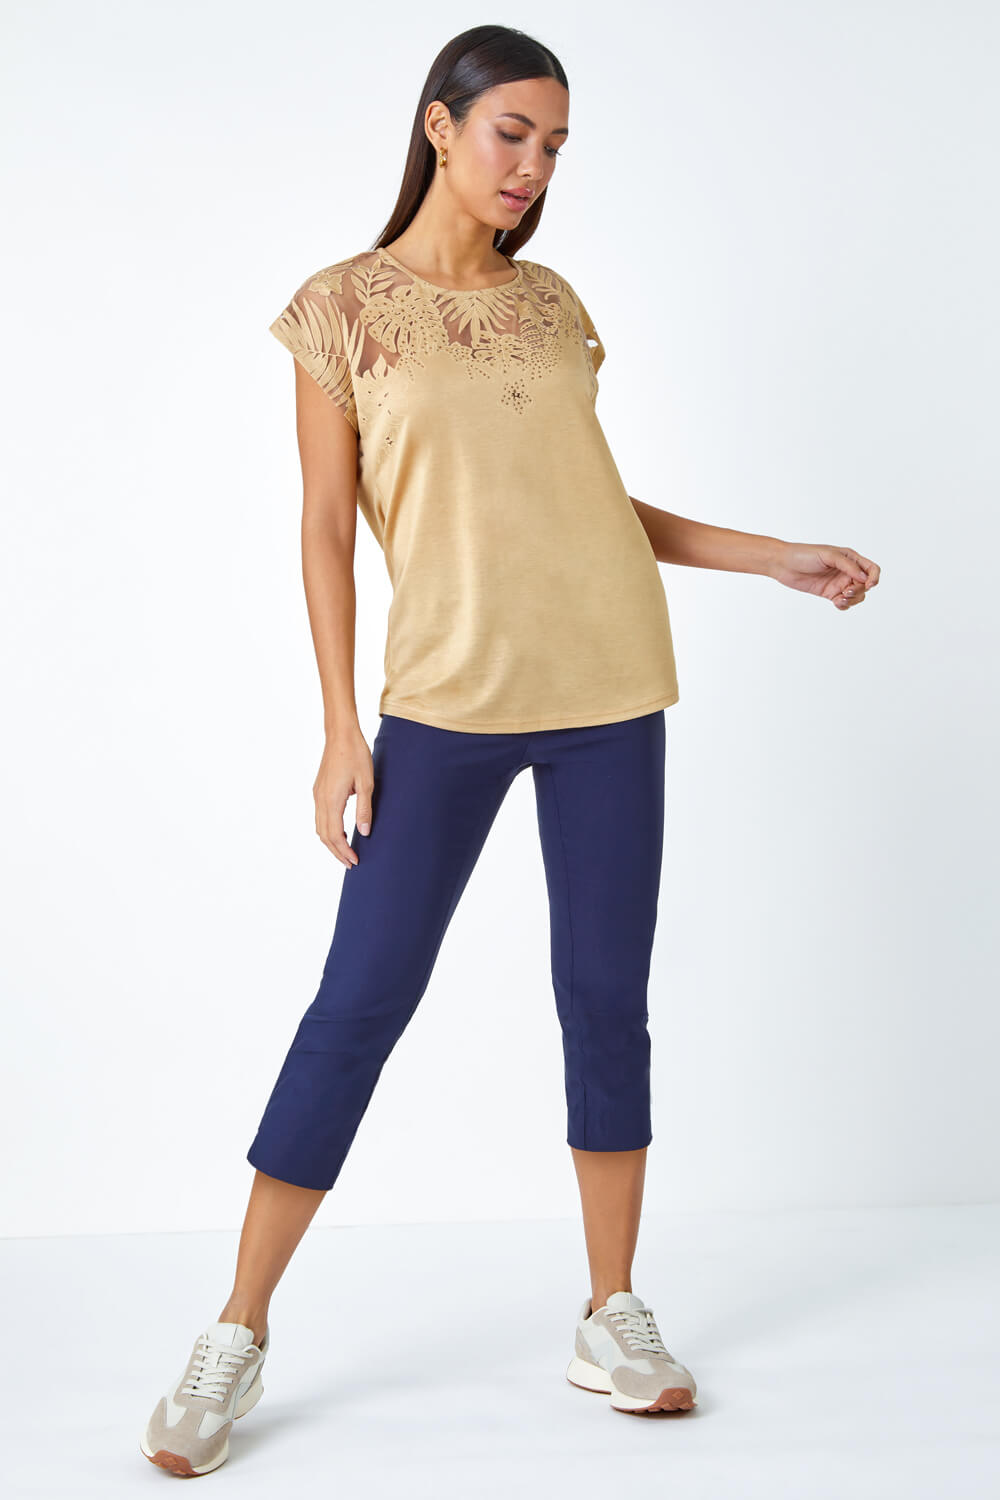 Gold Embellished Palm Print Cut Out T-Shirt, Image 4 of 5